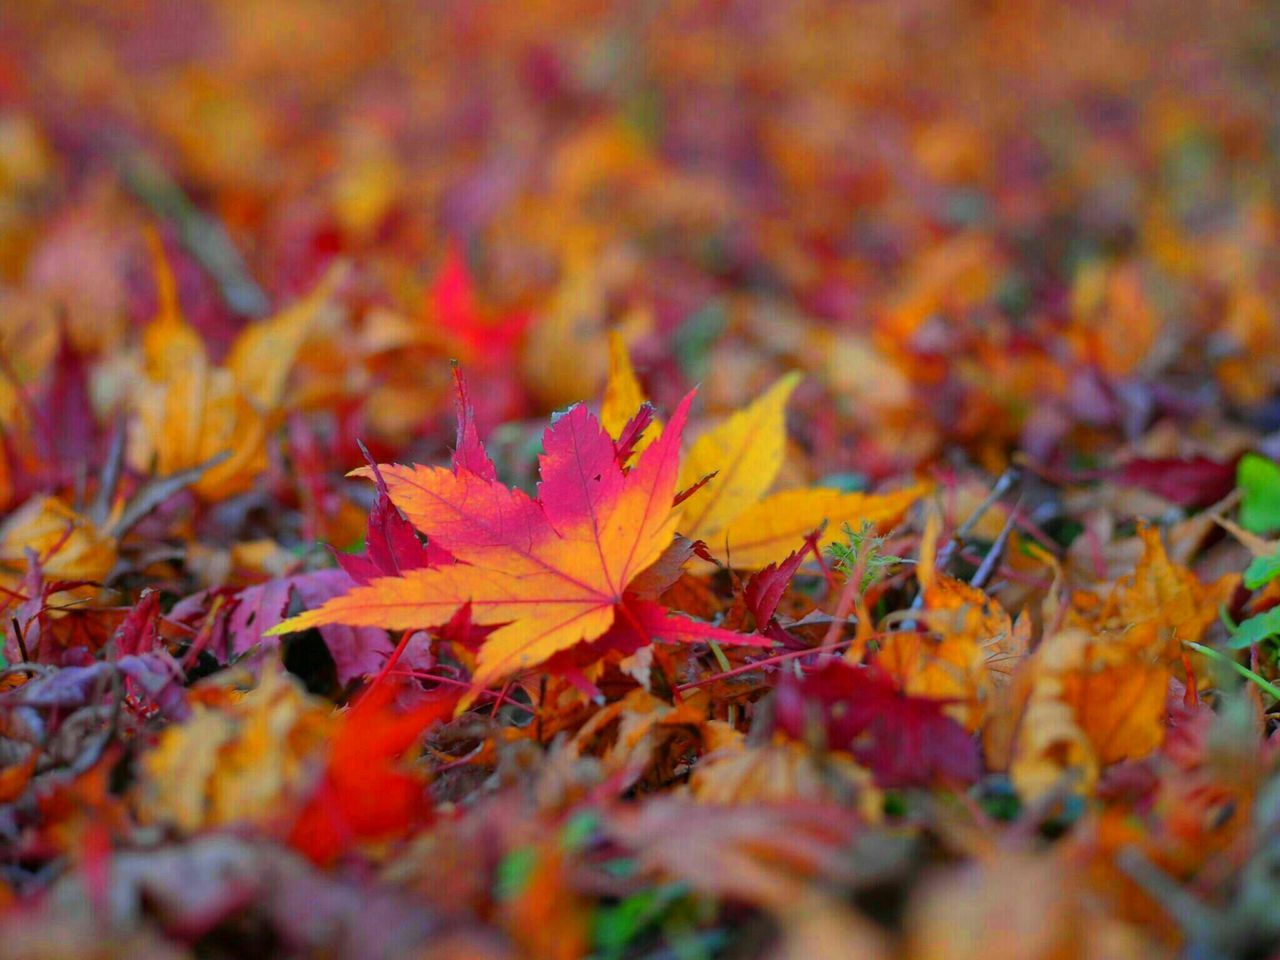 autumn, change, leaf, season, leaves, dry, orange color, selective focus, fallen, maple leaf, close-up, nature, abundance, fall, multi colored, natural condition, field, outdoors, beauty in nature, focus on foreground